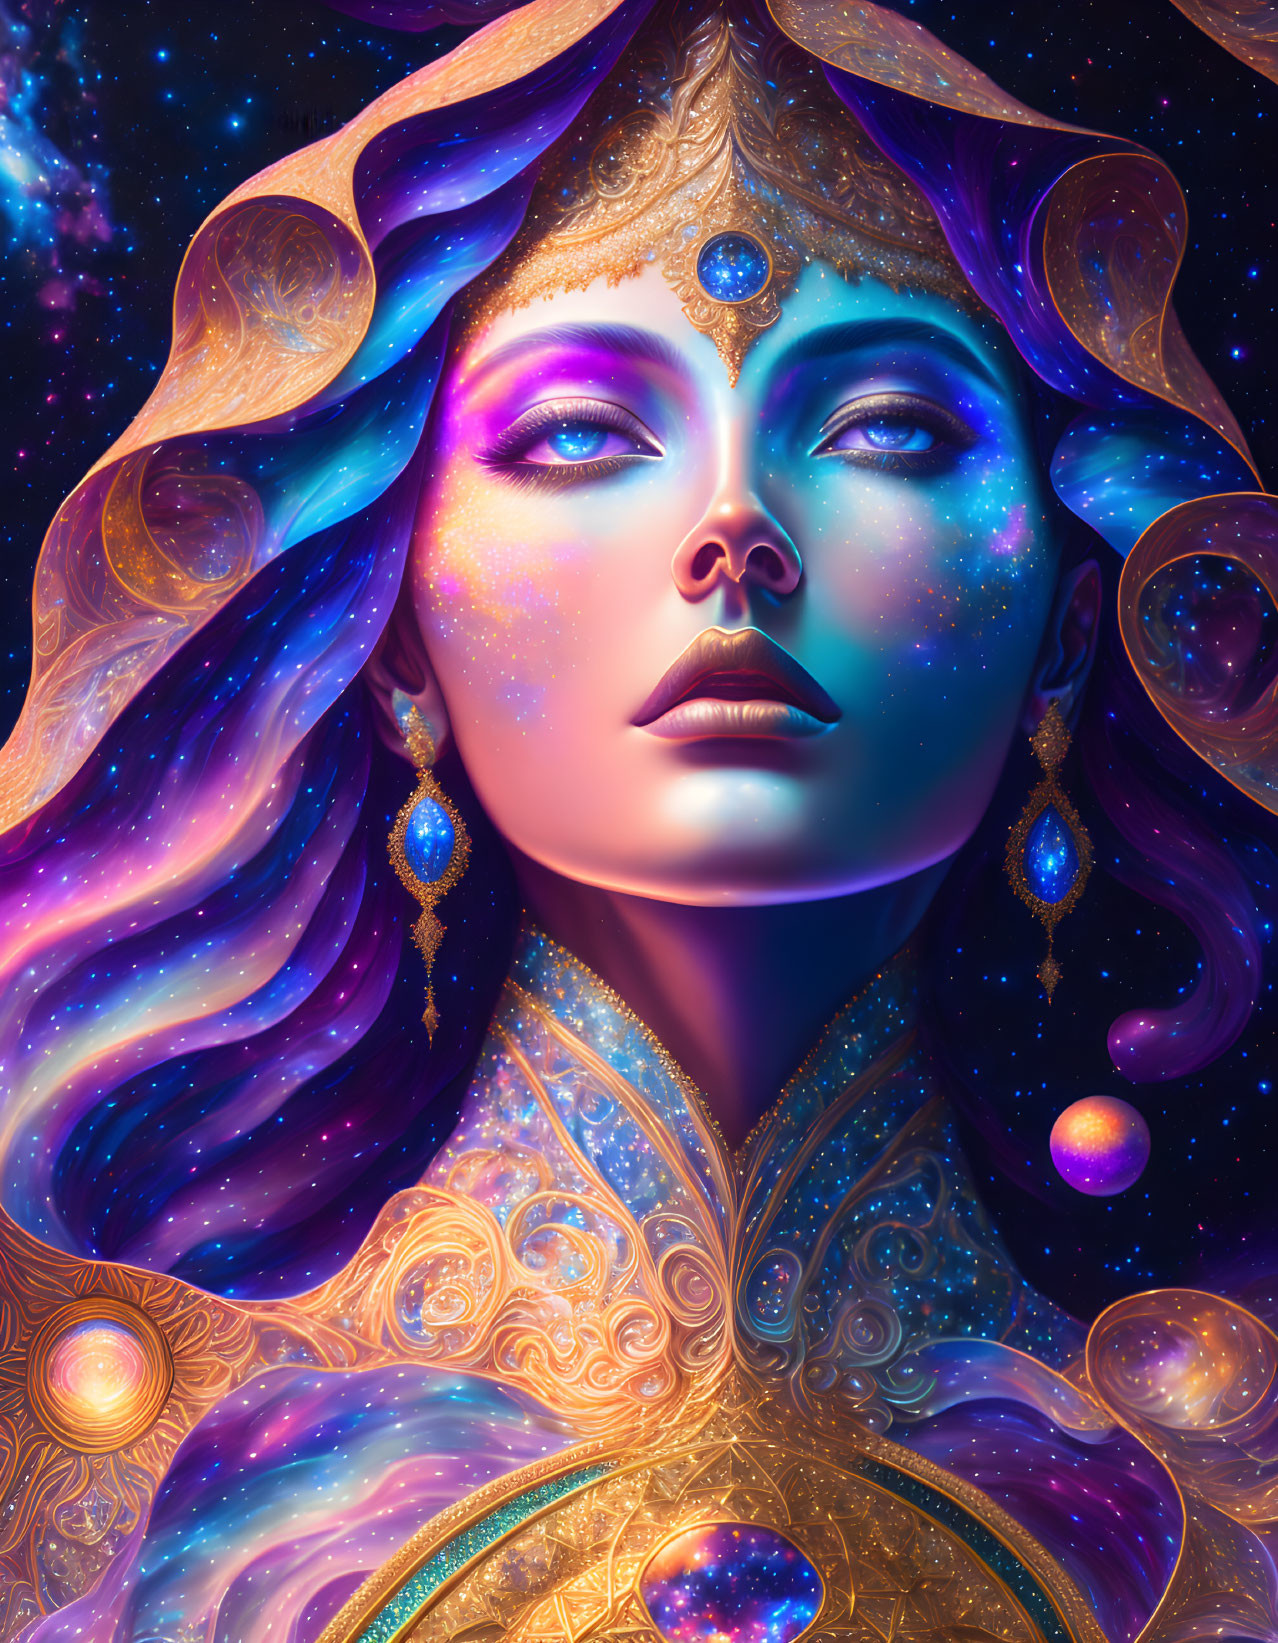 Vibrant digital portrait of woman with cosmic makeup and golden accessories against starry space backdrop.